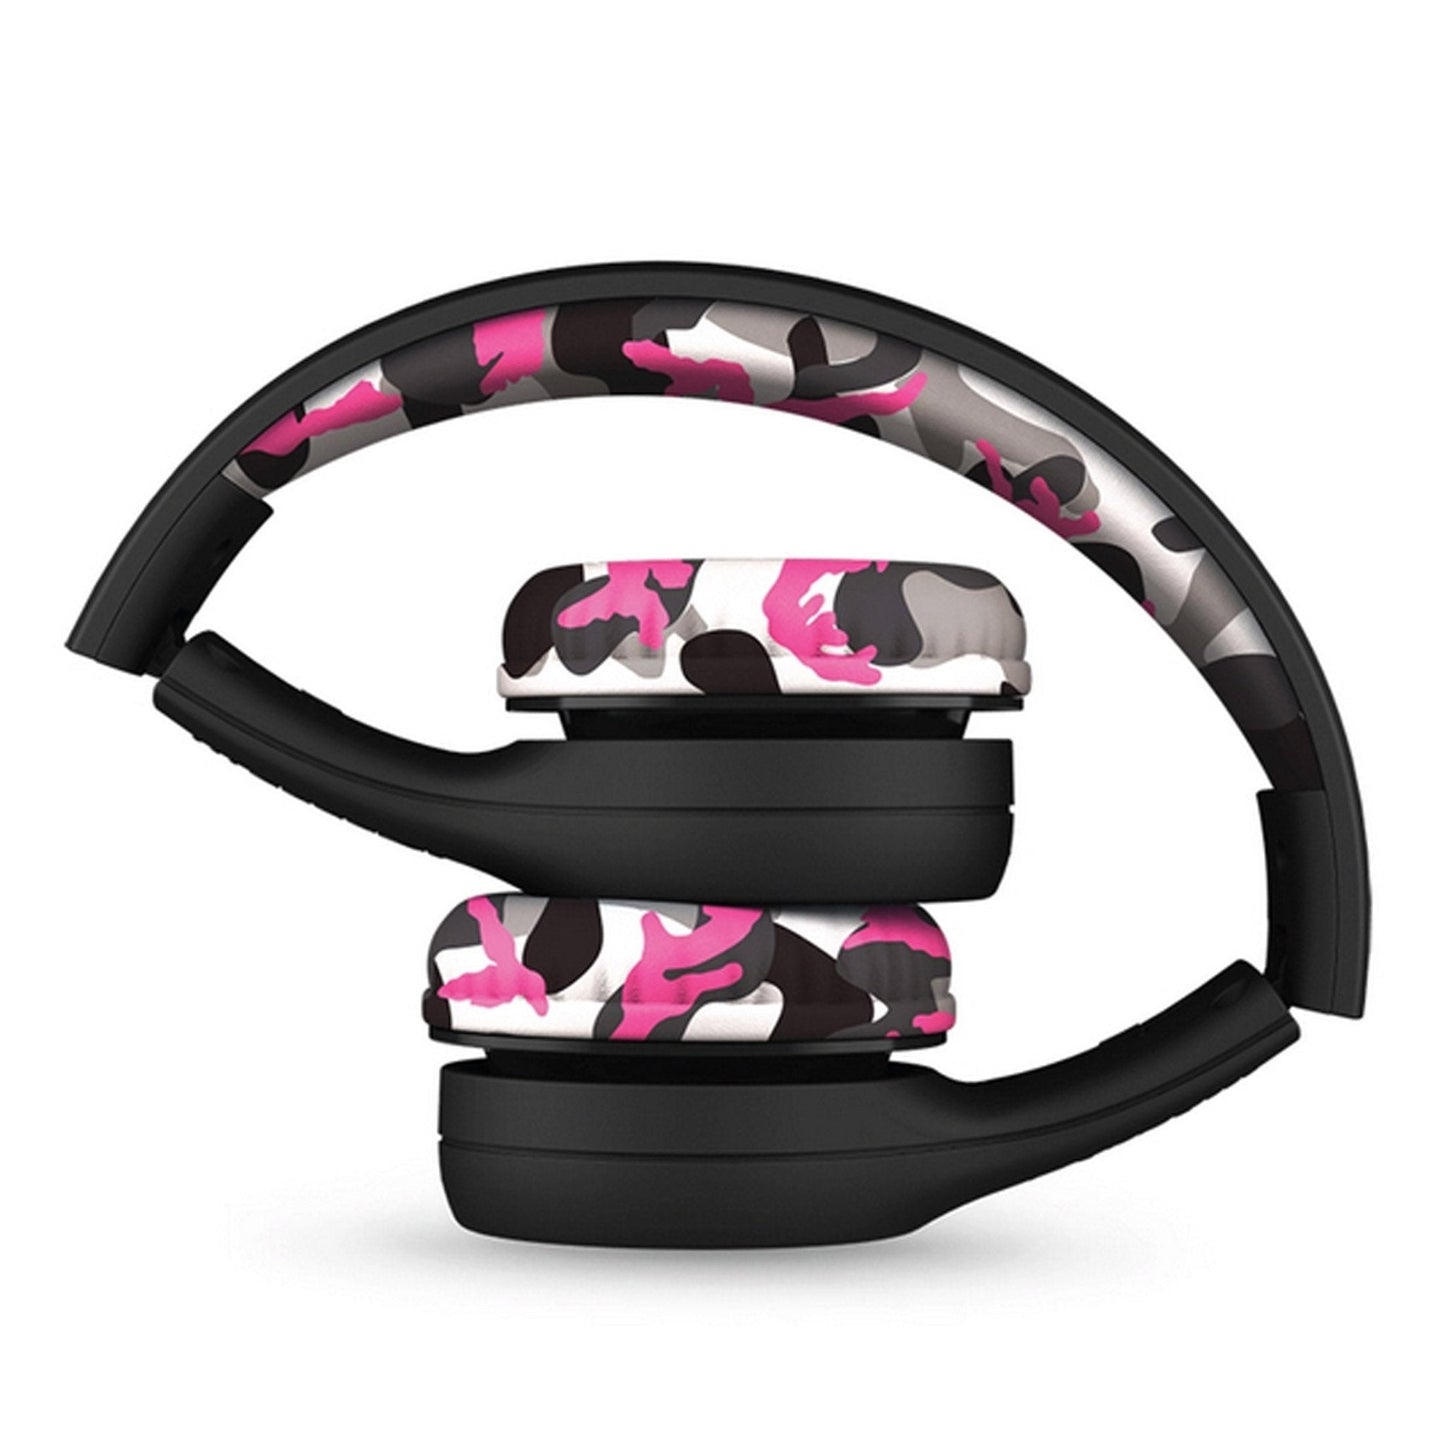 LilGadgets Connect + Childrens Kids Wired Music Headphones Pink Camo - Little Kids Business